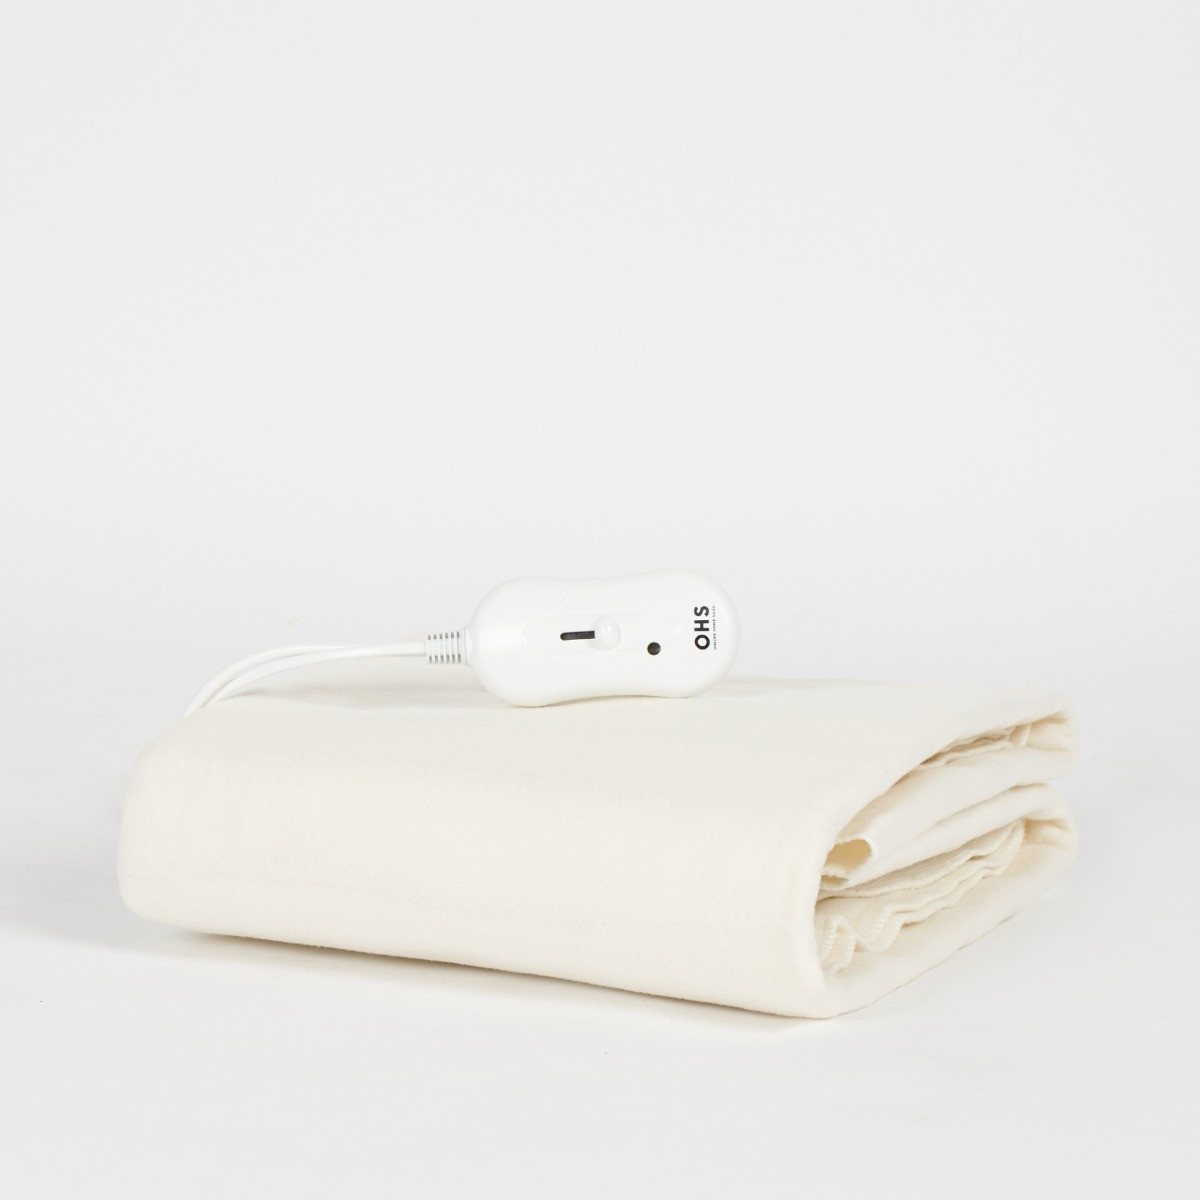 OHS Heated Under Electric Blanket, White - Double>